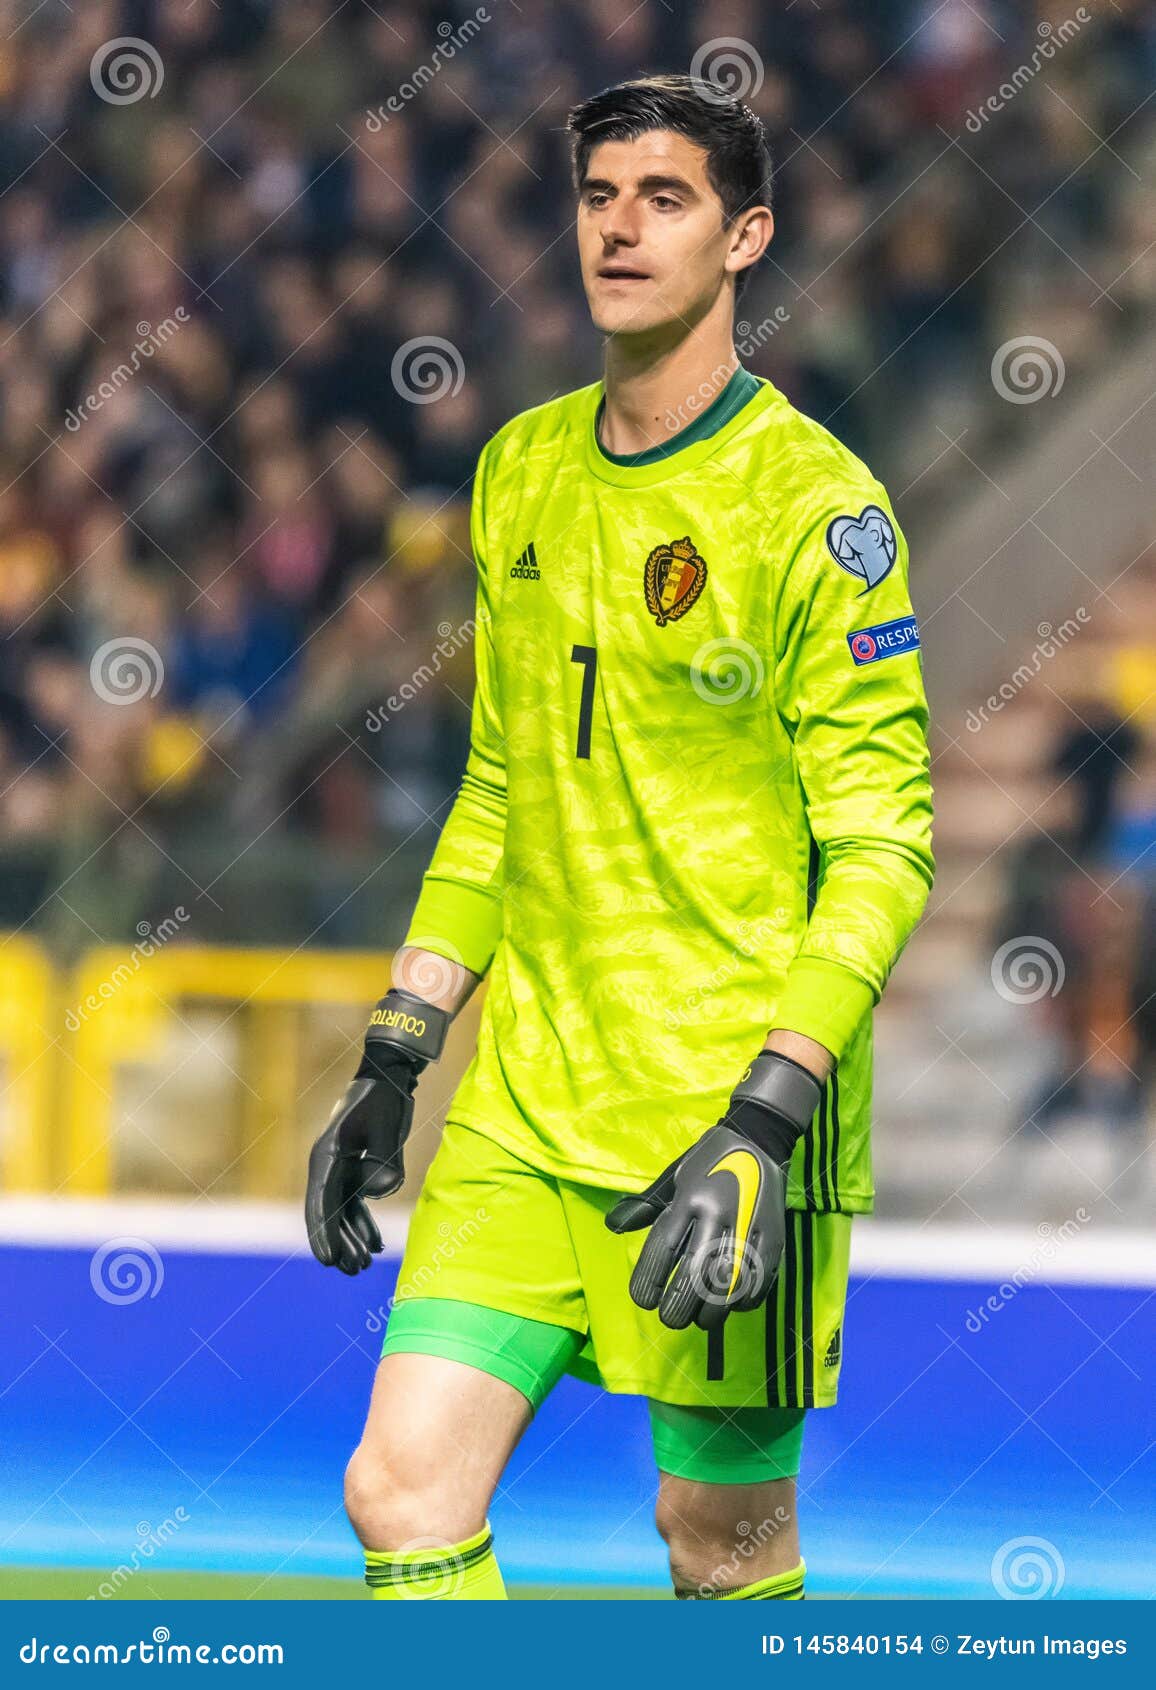 Real Madrid And Belgium National Football Team Goalkeeper Thibaut Courtois Editorial Stock Image Image Of Brussels Belgian 145840154